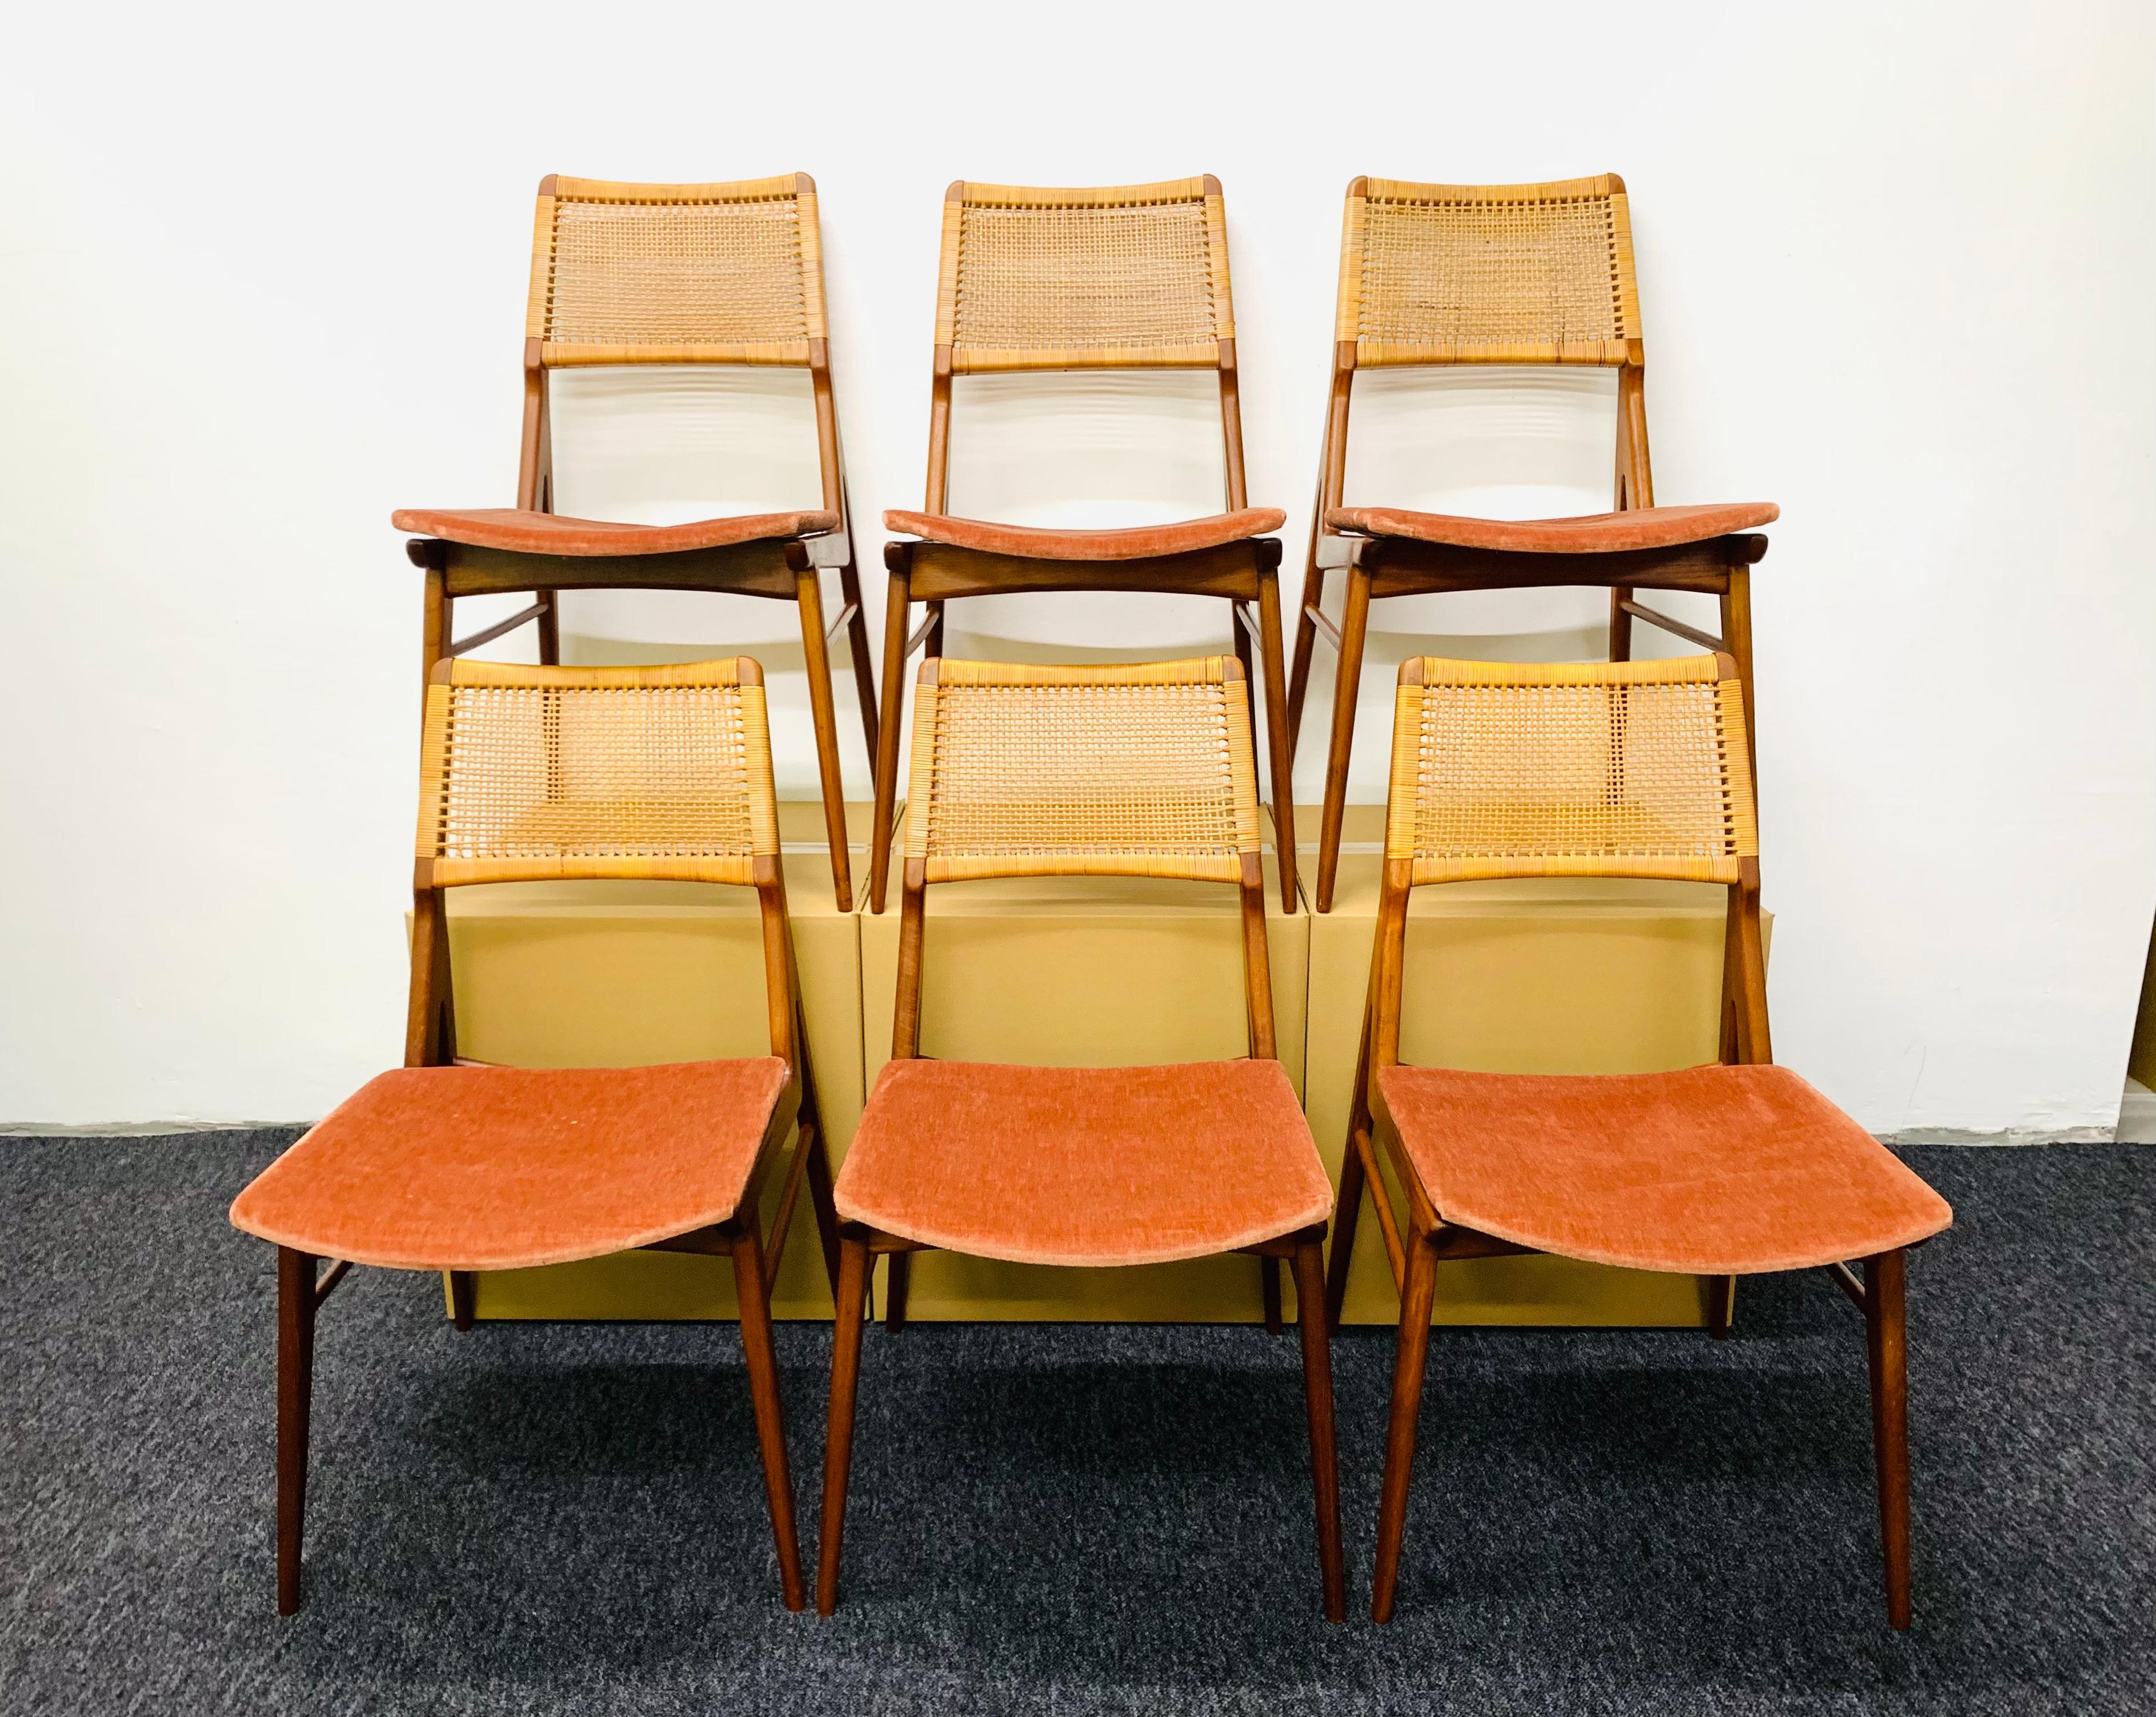 Extraordinarily beautiful teak chairs from the 1950s.
Very delicately crafted with great attention to detail.
The rattan weave makes the chairs very special.
A wonderful addition to any home.

Condition:

Very good vintage condition with slight